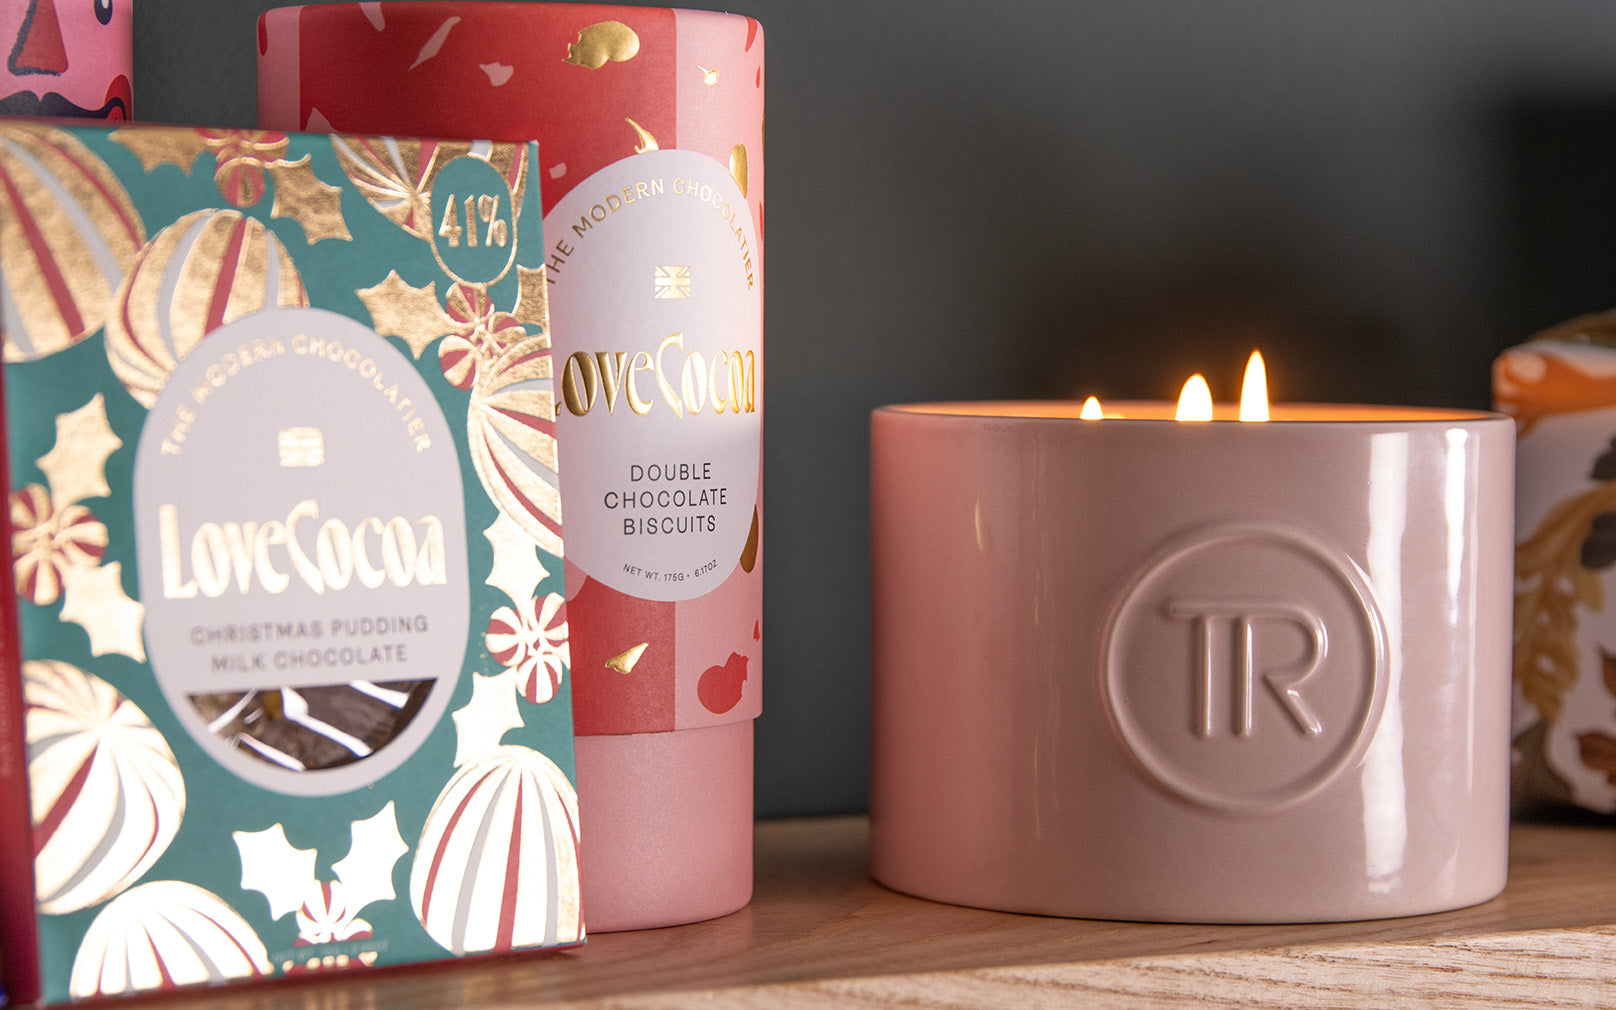 tom raffield candle and lovecocoa chocolate